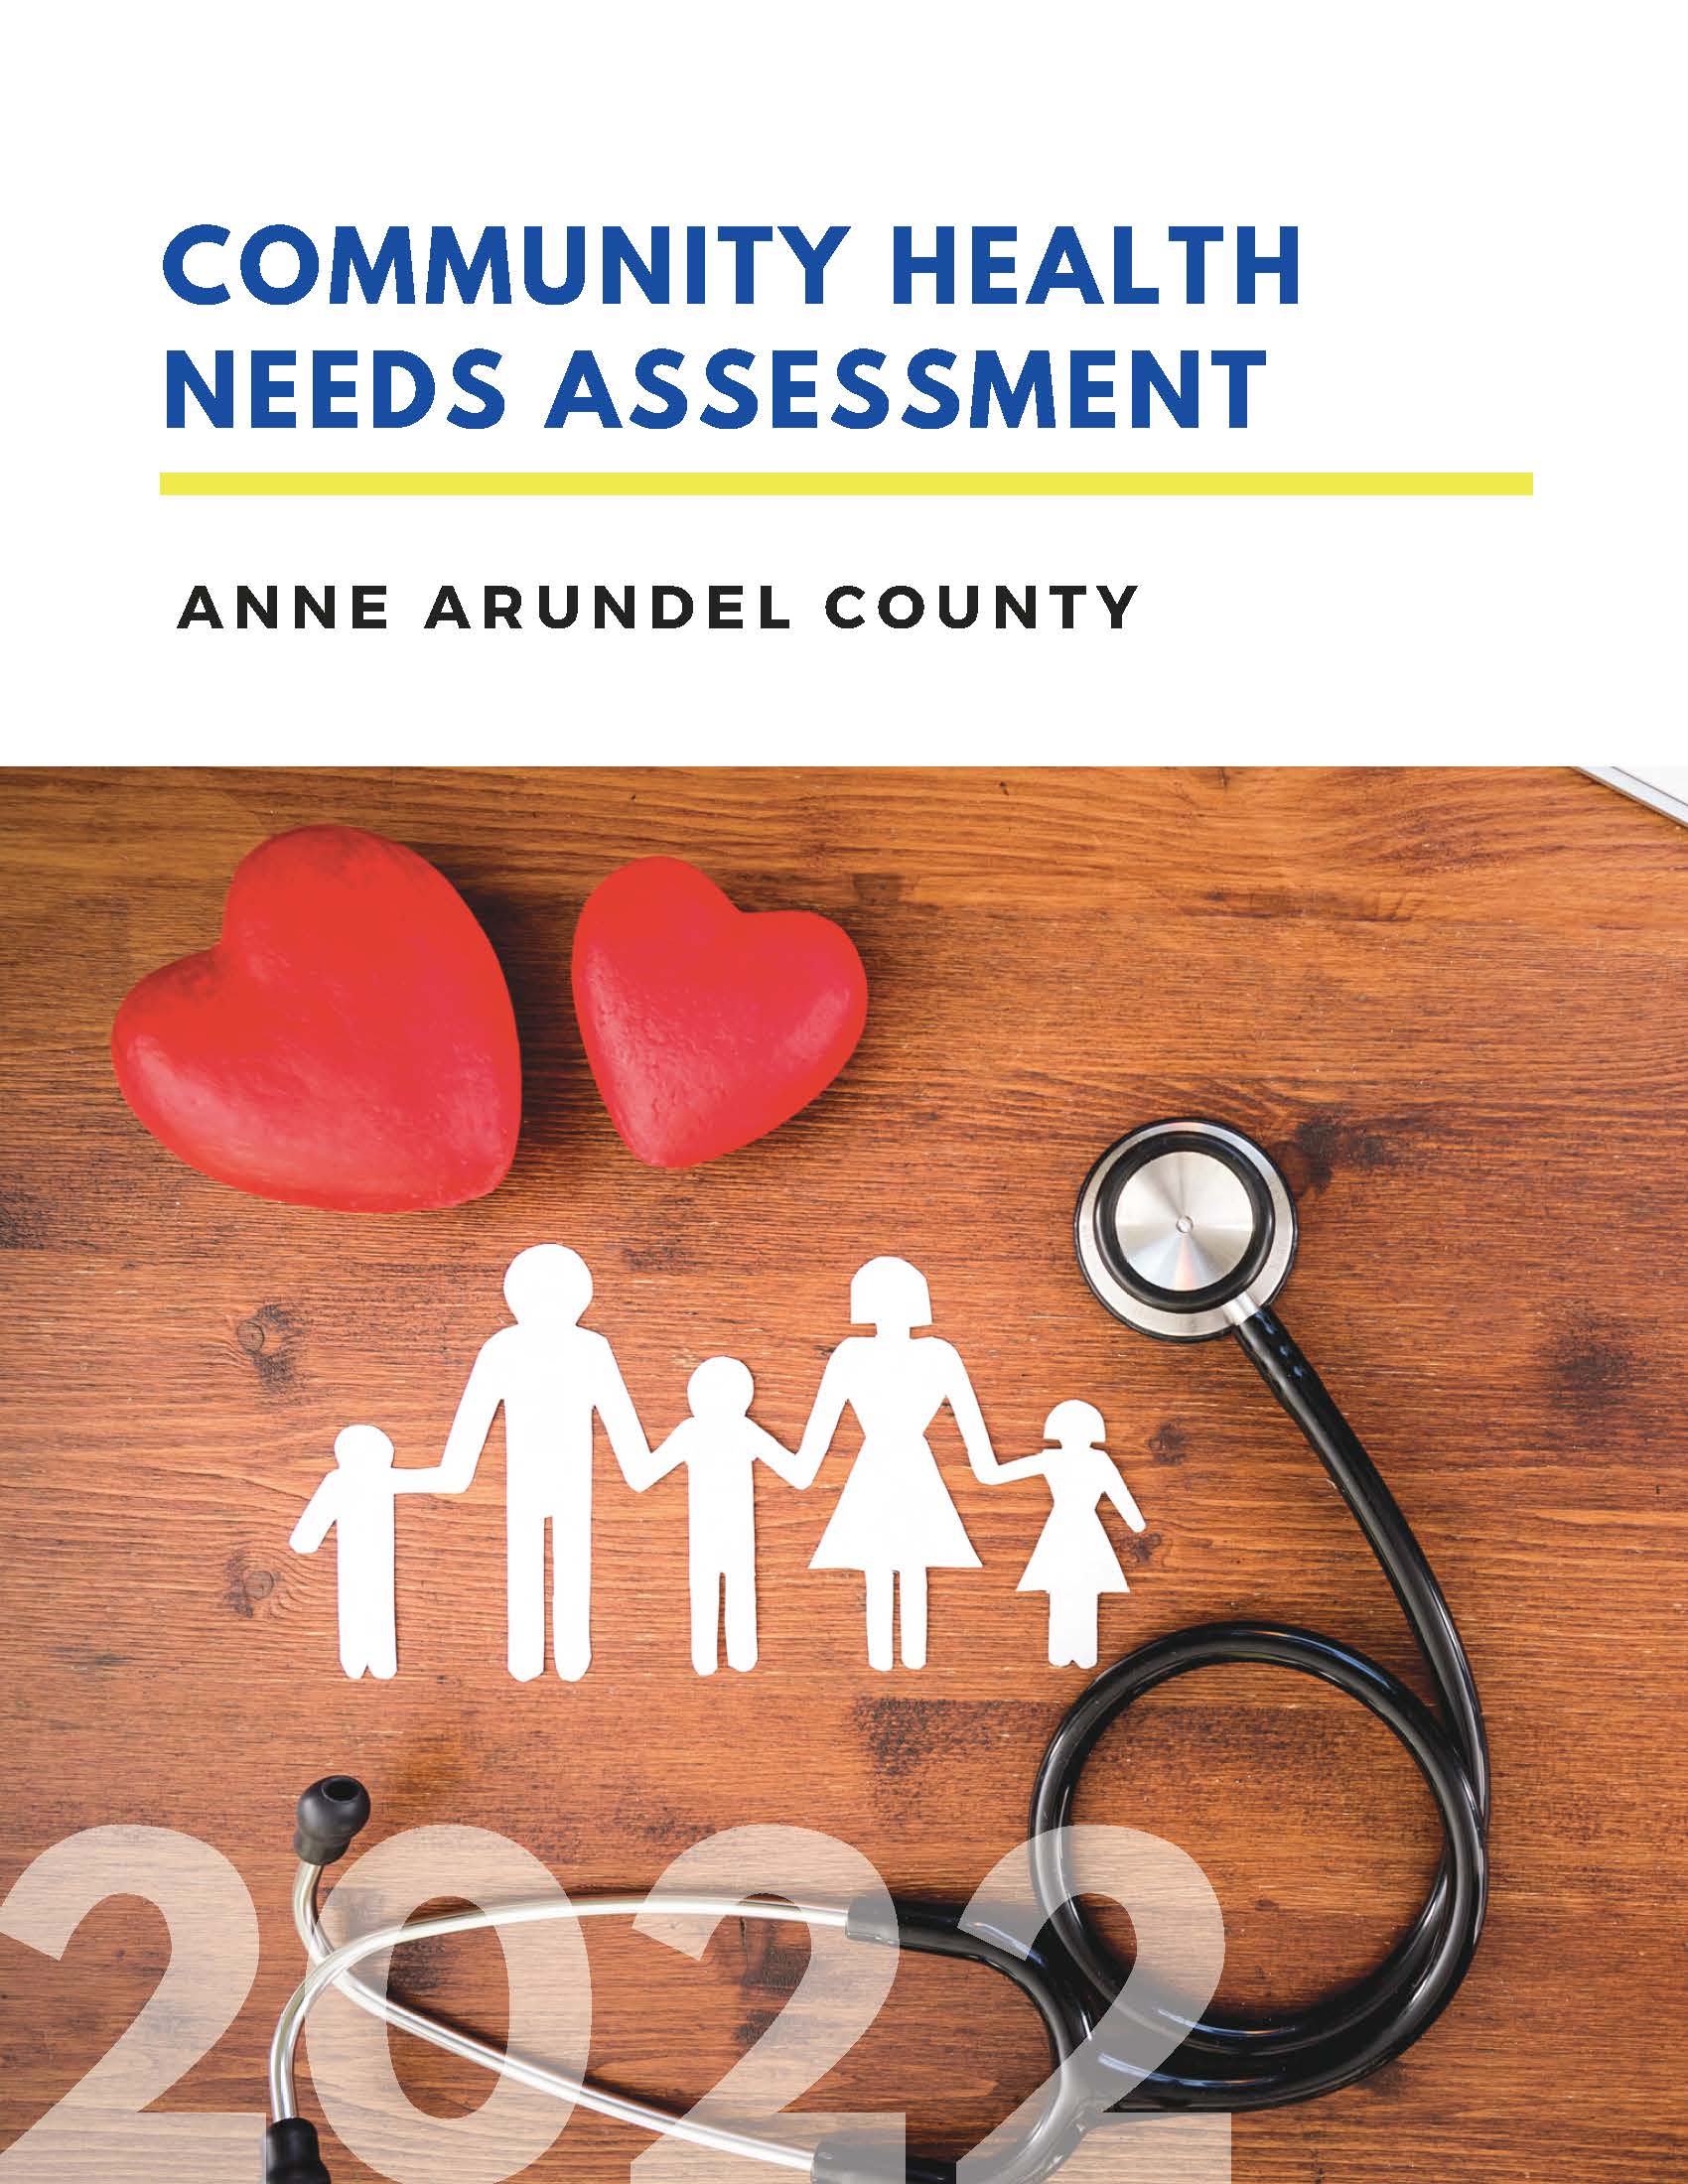 The 2022 Community Health Needs Assessment Report Coverpage